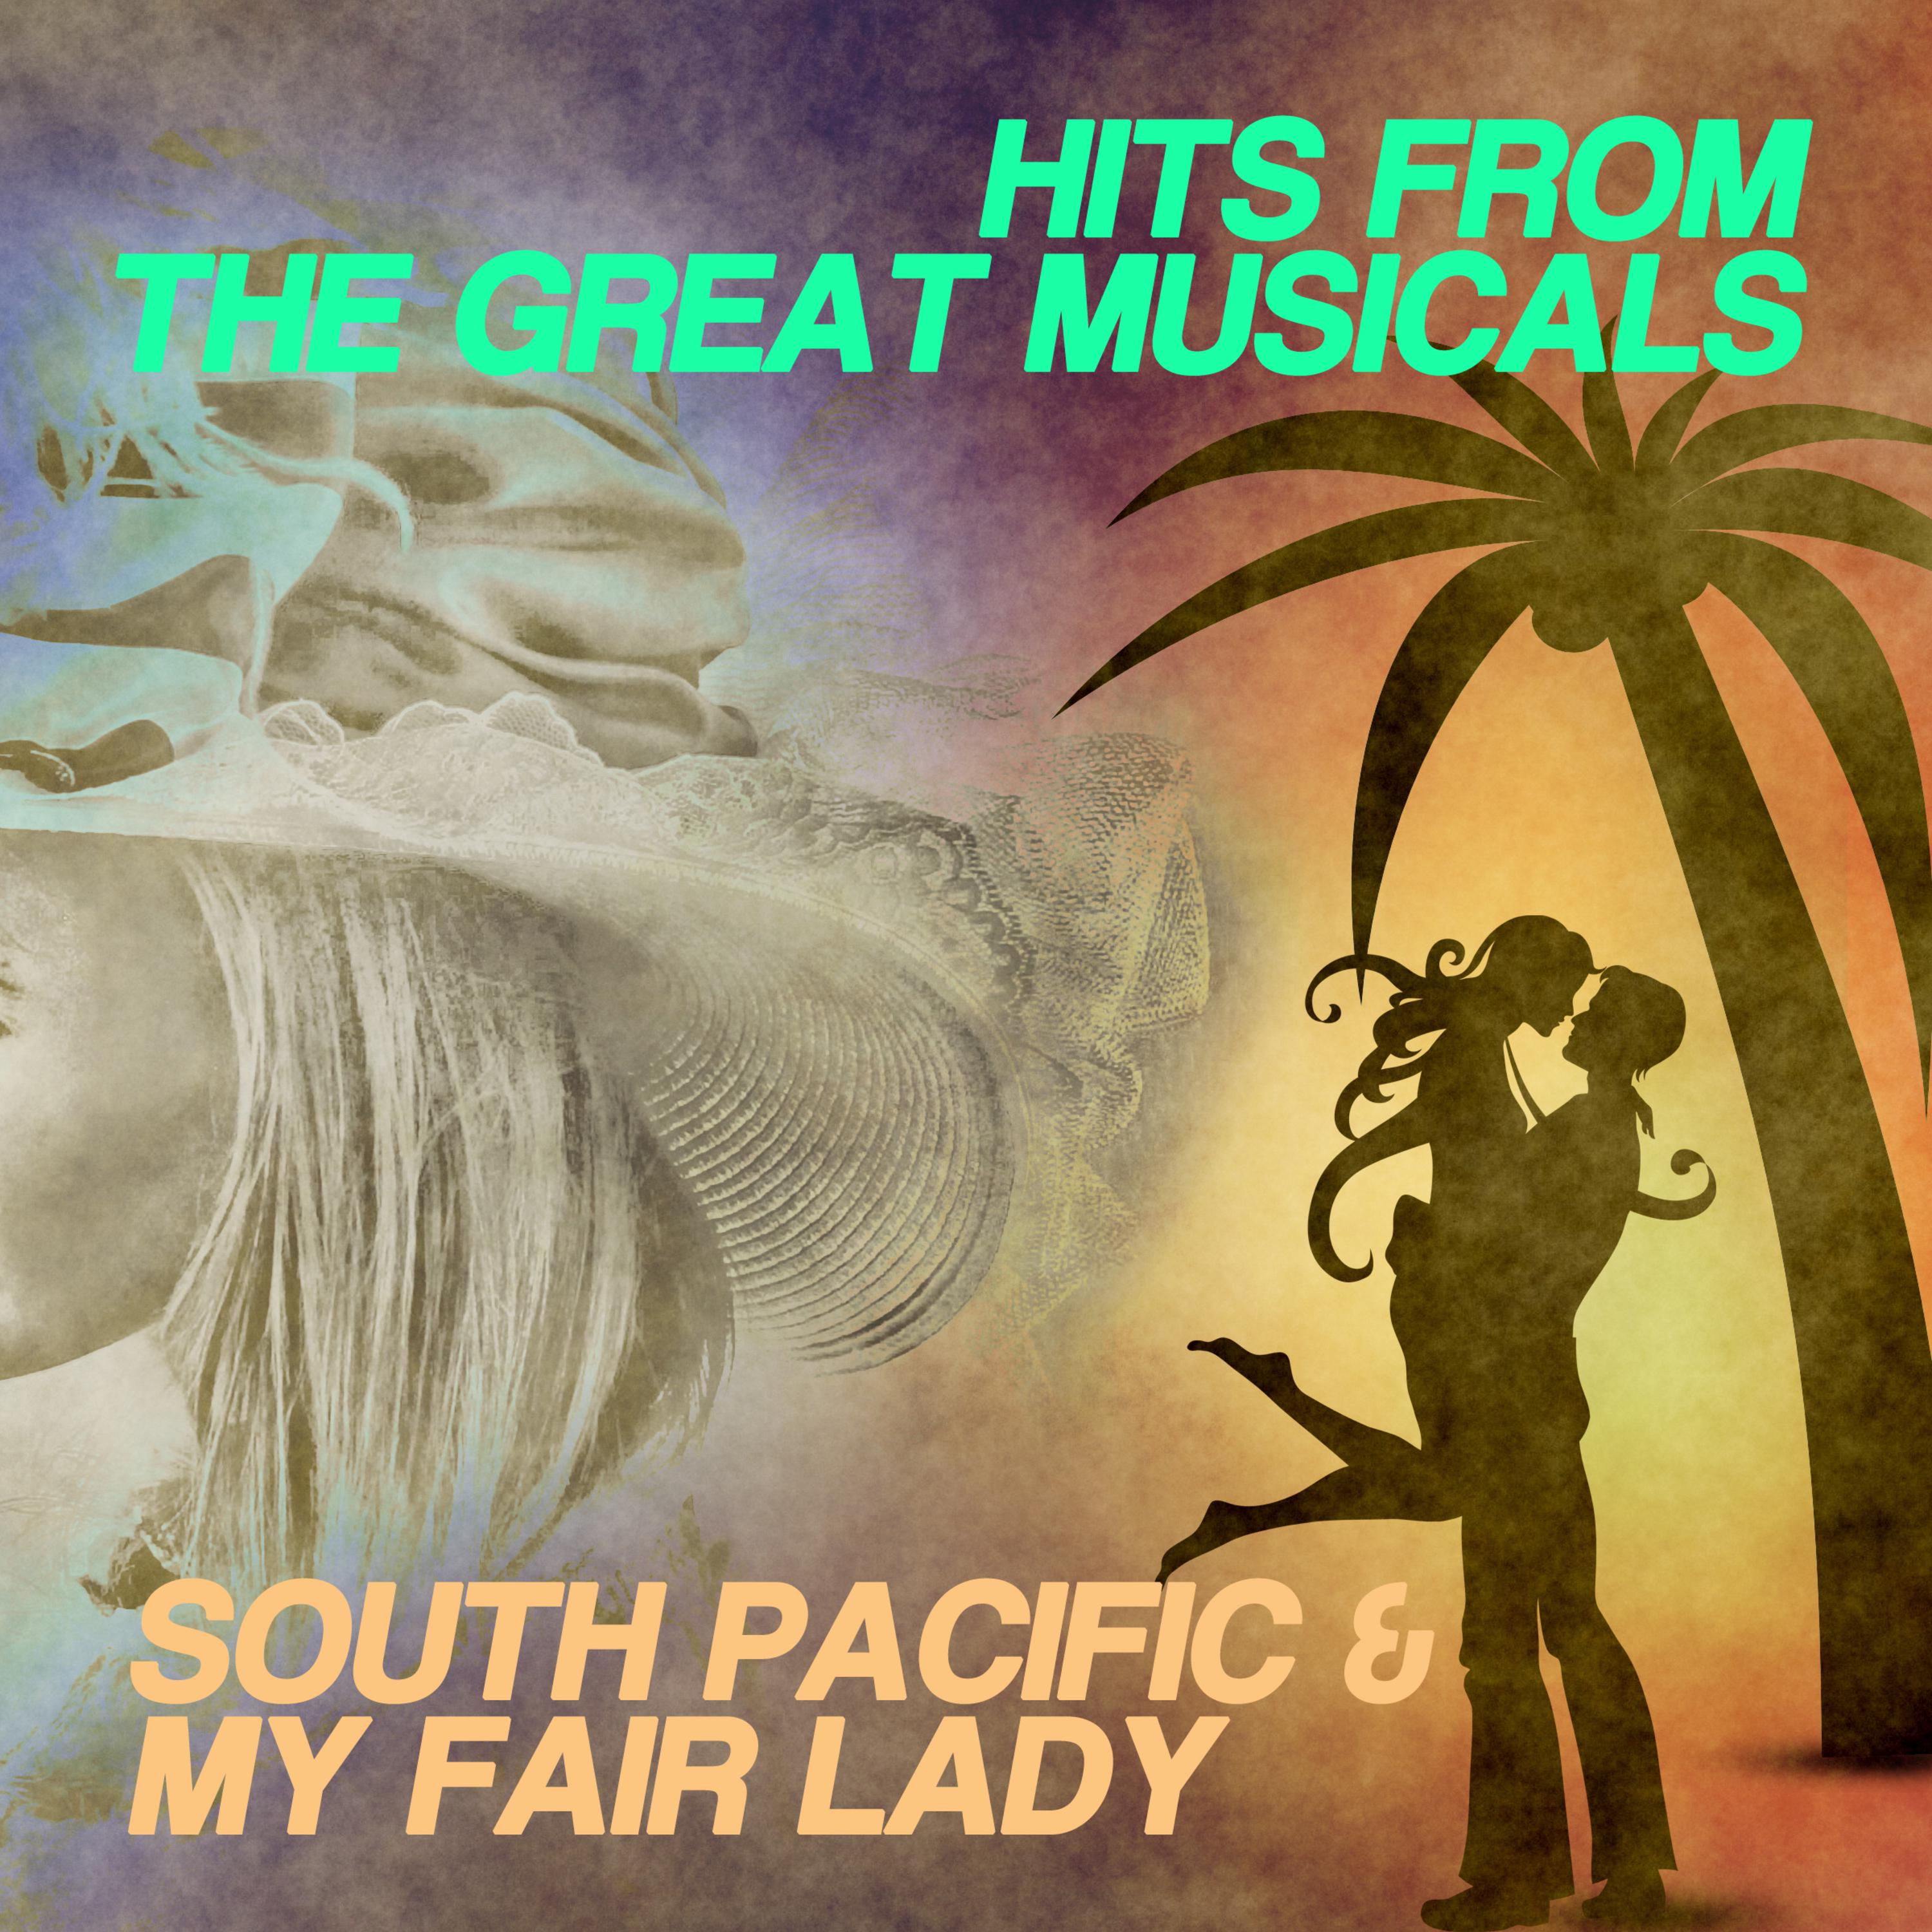 Hits From The Great Musicals: South Pacific & My Fair Lady